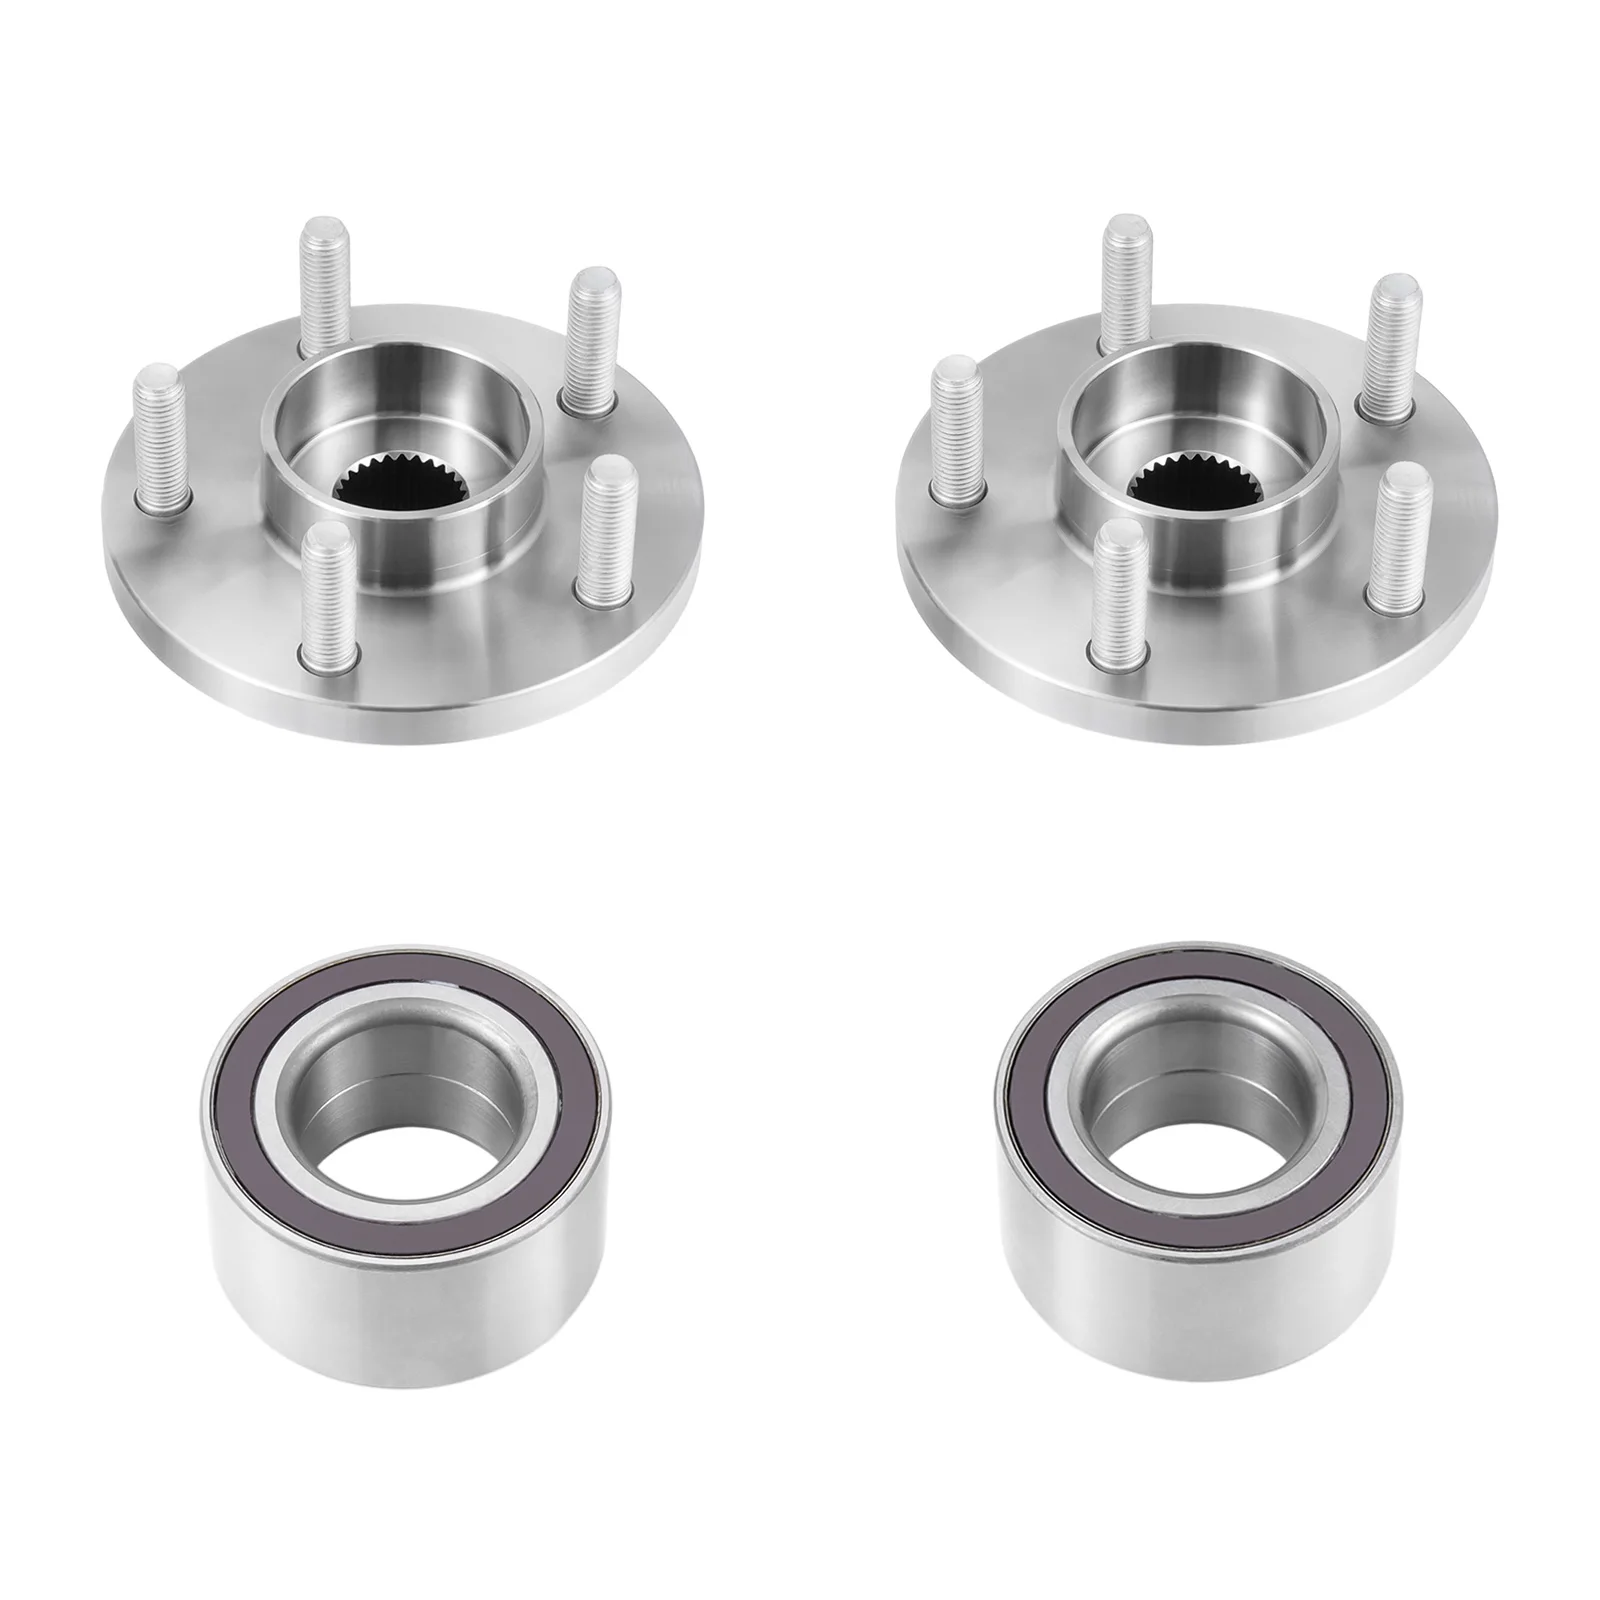 

2 Front Wheel Hub Bearing Kits Fit For 2013-2019 Ford Escape 2015-2019 Lincoln MKC